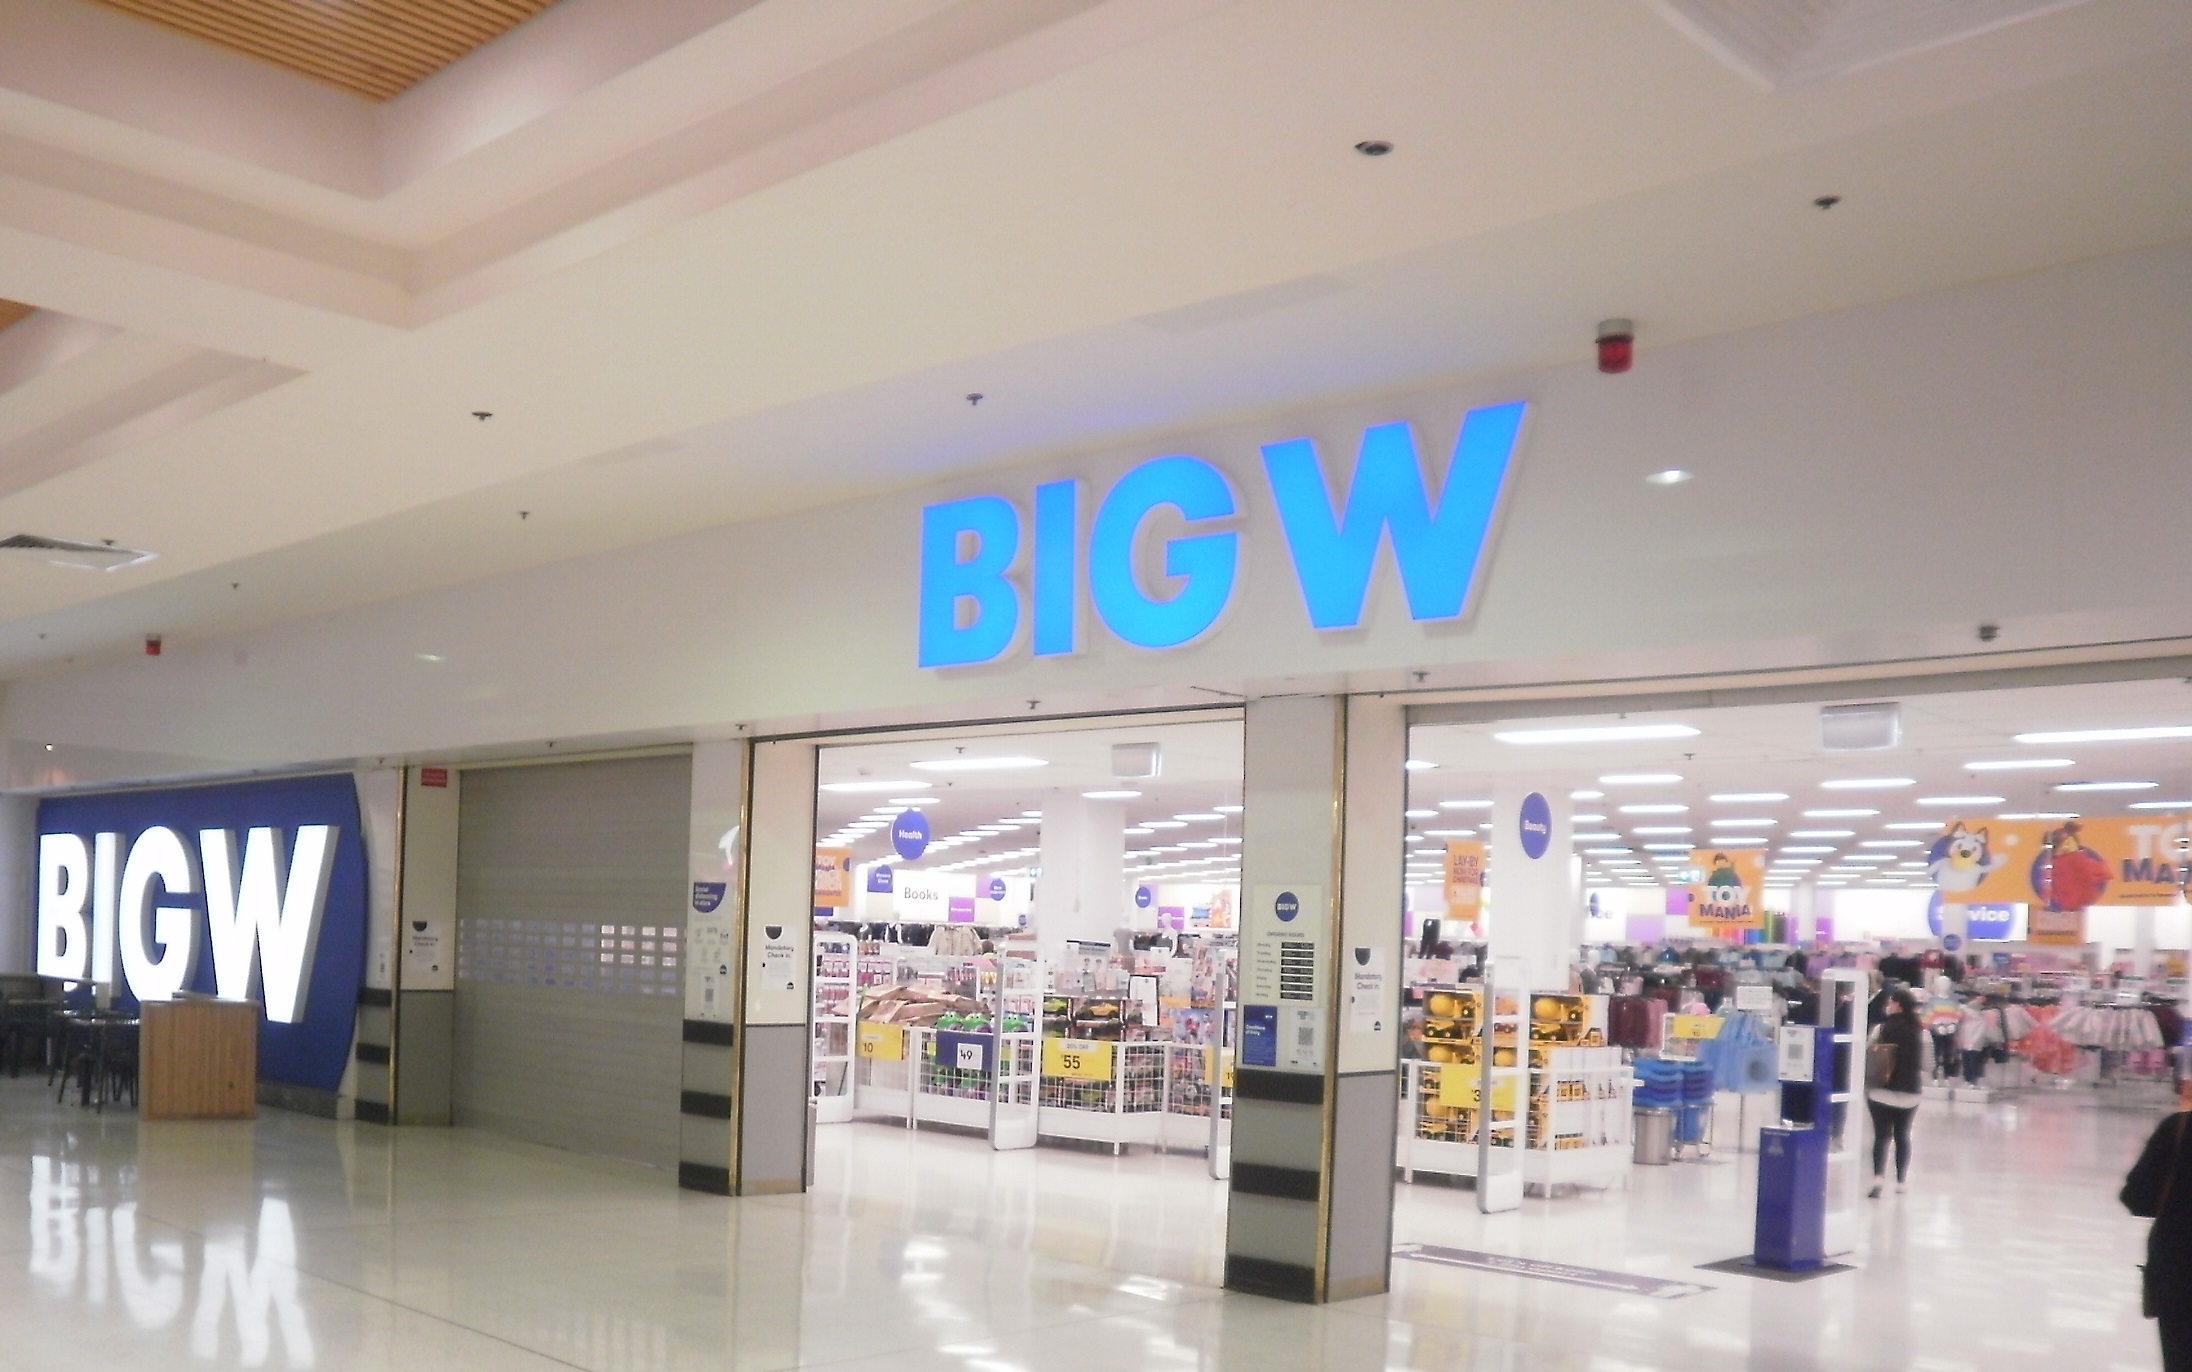 Big W (stylised as BIG W) is an Australian chain of discount department stores, which was founded in regional New South Wales in 1964. The company is a division of the Woolworths Group and as of 2023 operated 177 stores, with around 18,000 employees across mainland Australia and Tasmania. Big W stocks clothing, health and beauty, garden, manchester, kitchenware, toys, pet items, office items, books, televisions, gaming consoles, video games, some furniture items, snack food and small electrical household appliances.